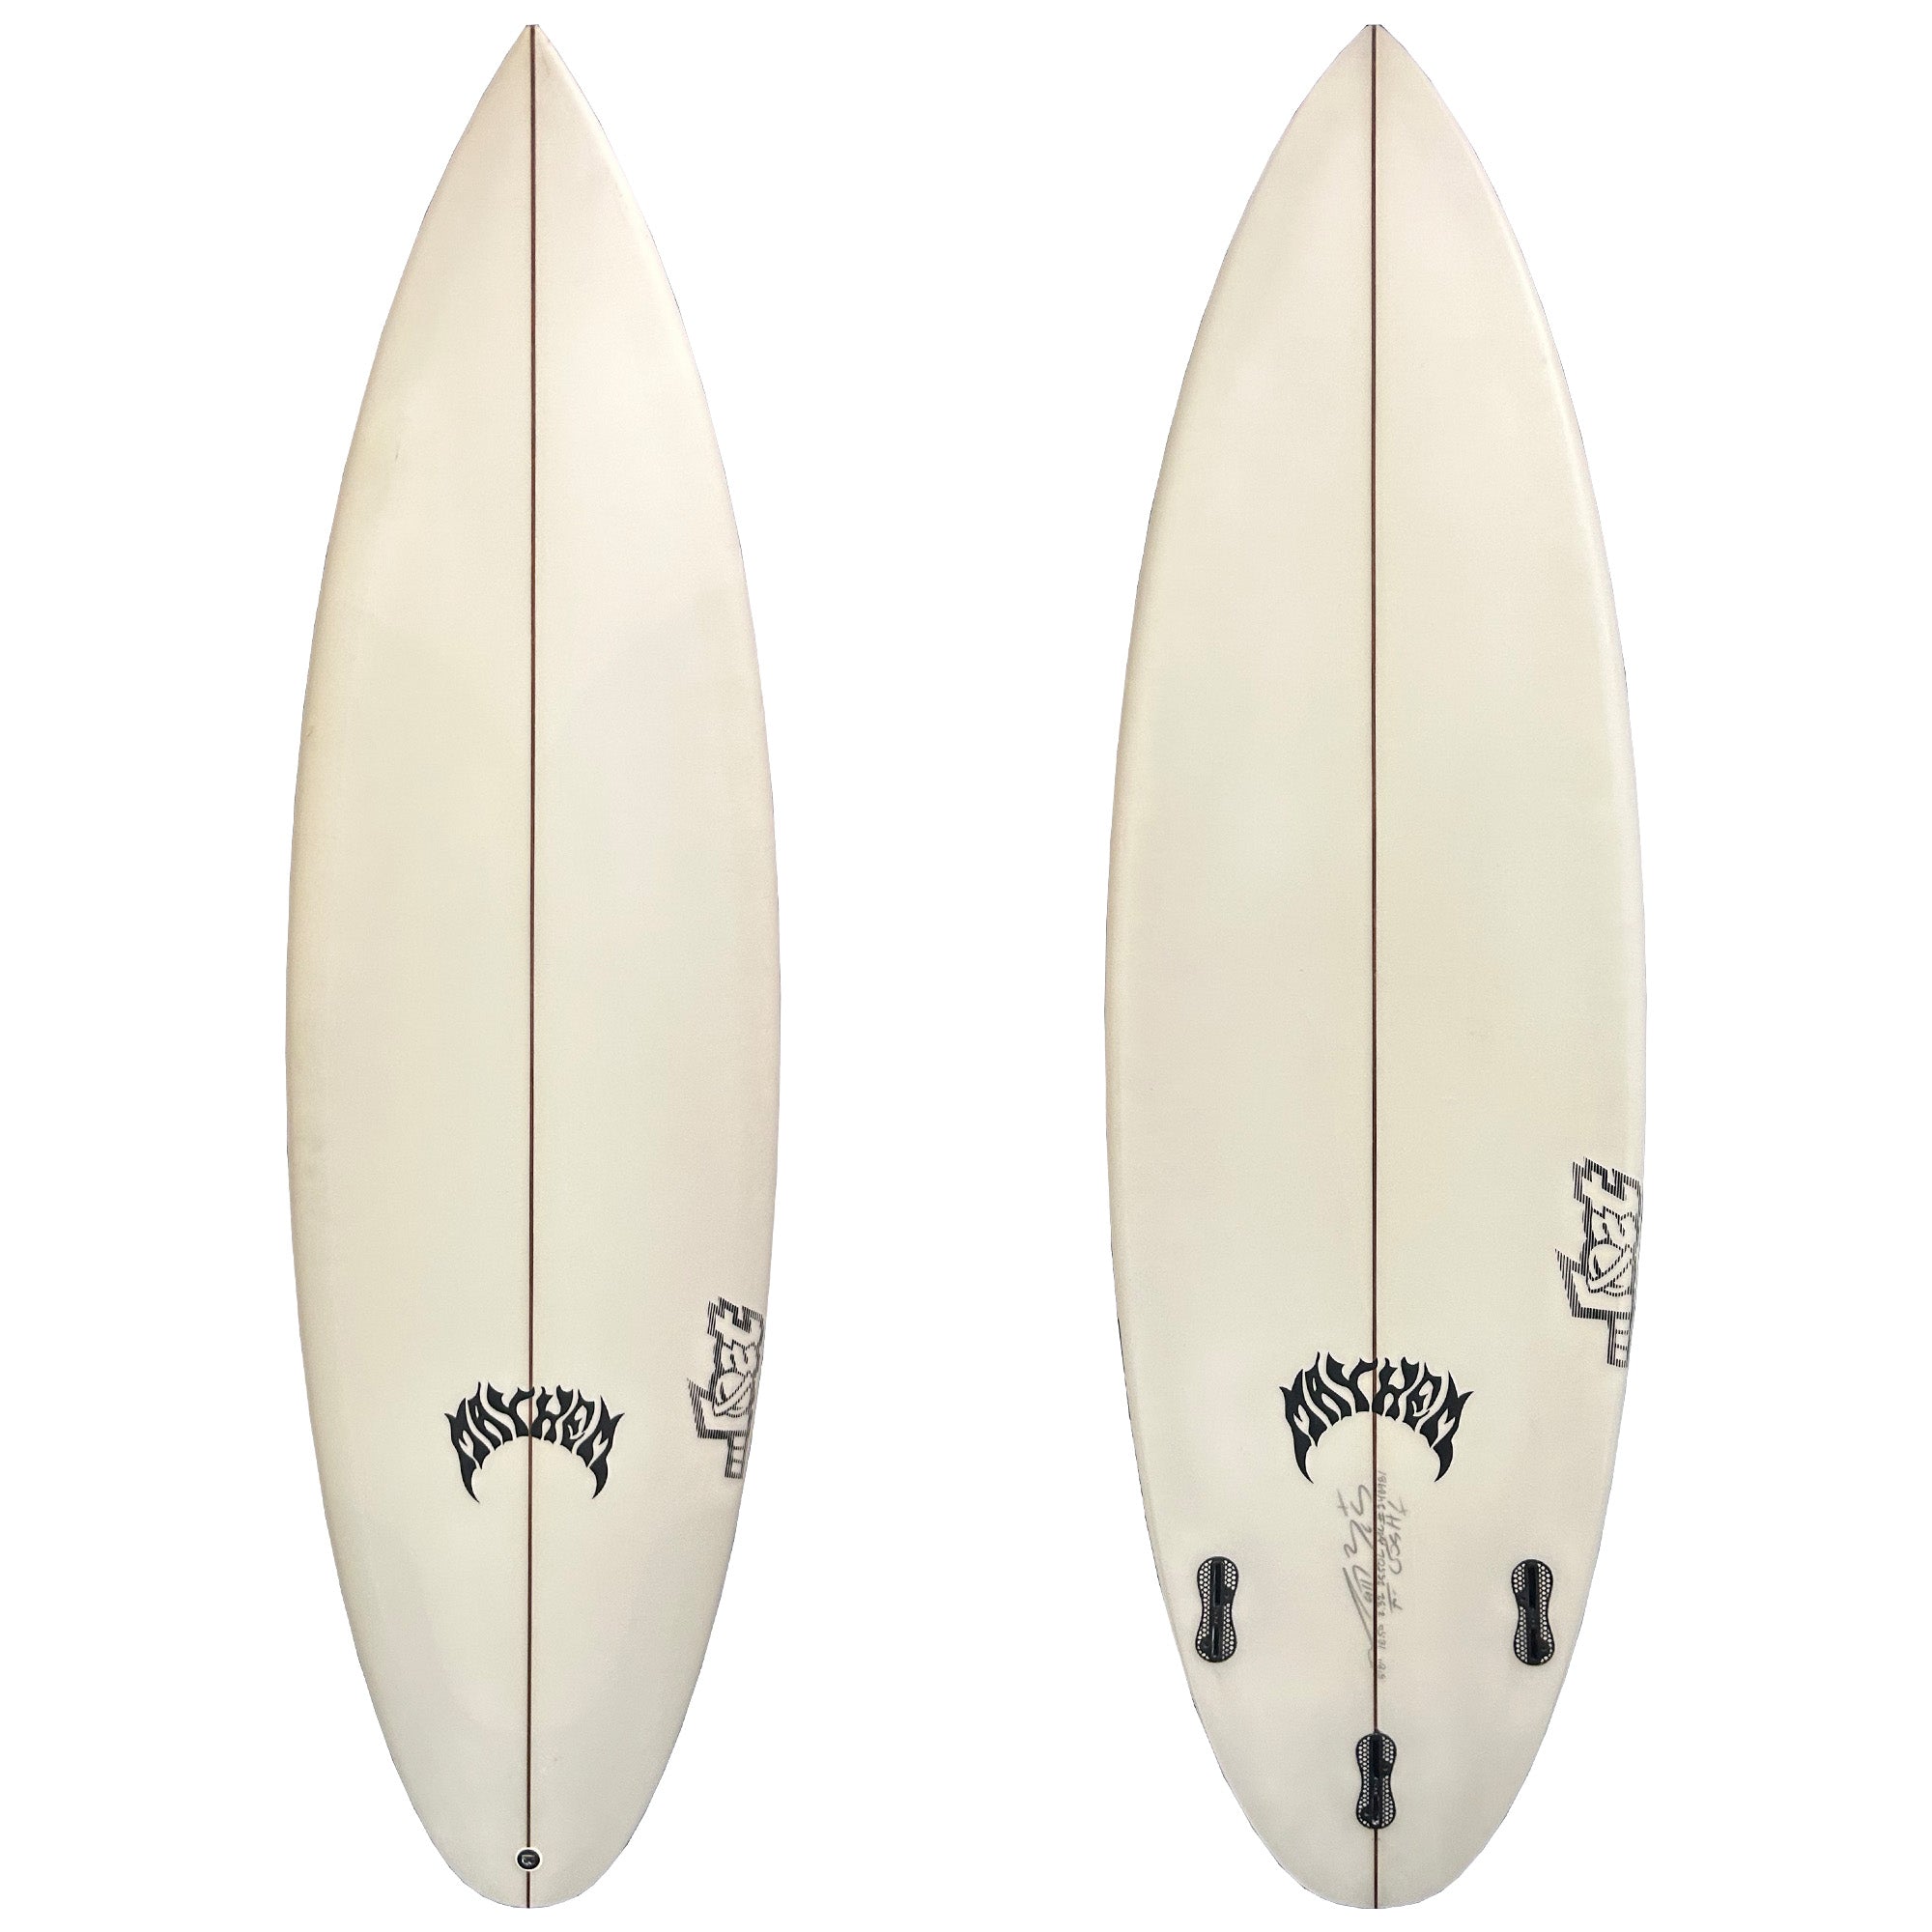 Lost Driver 3.0 5'8 Used Surfboard